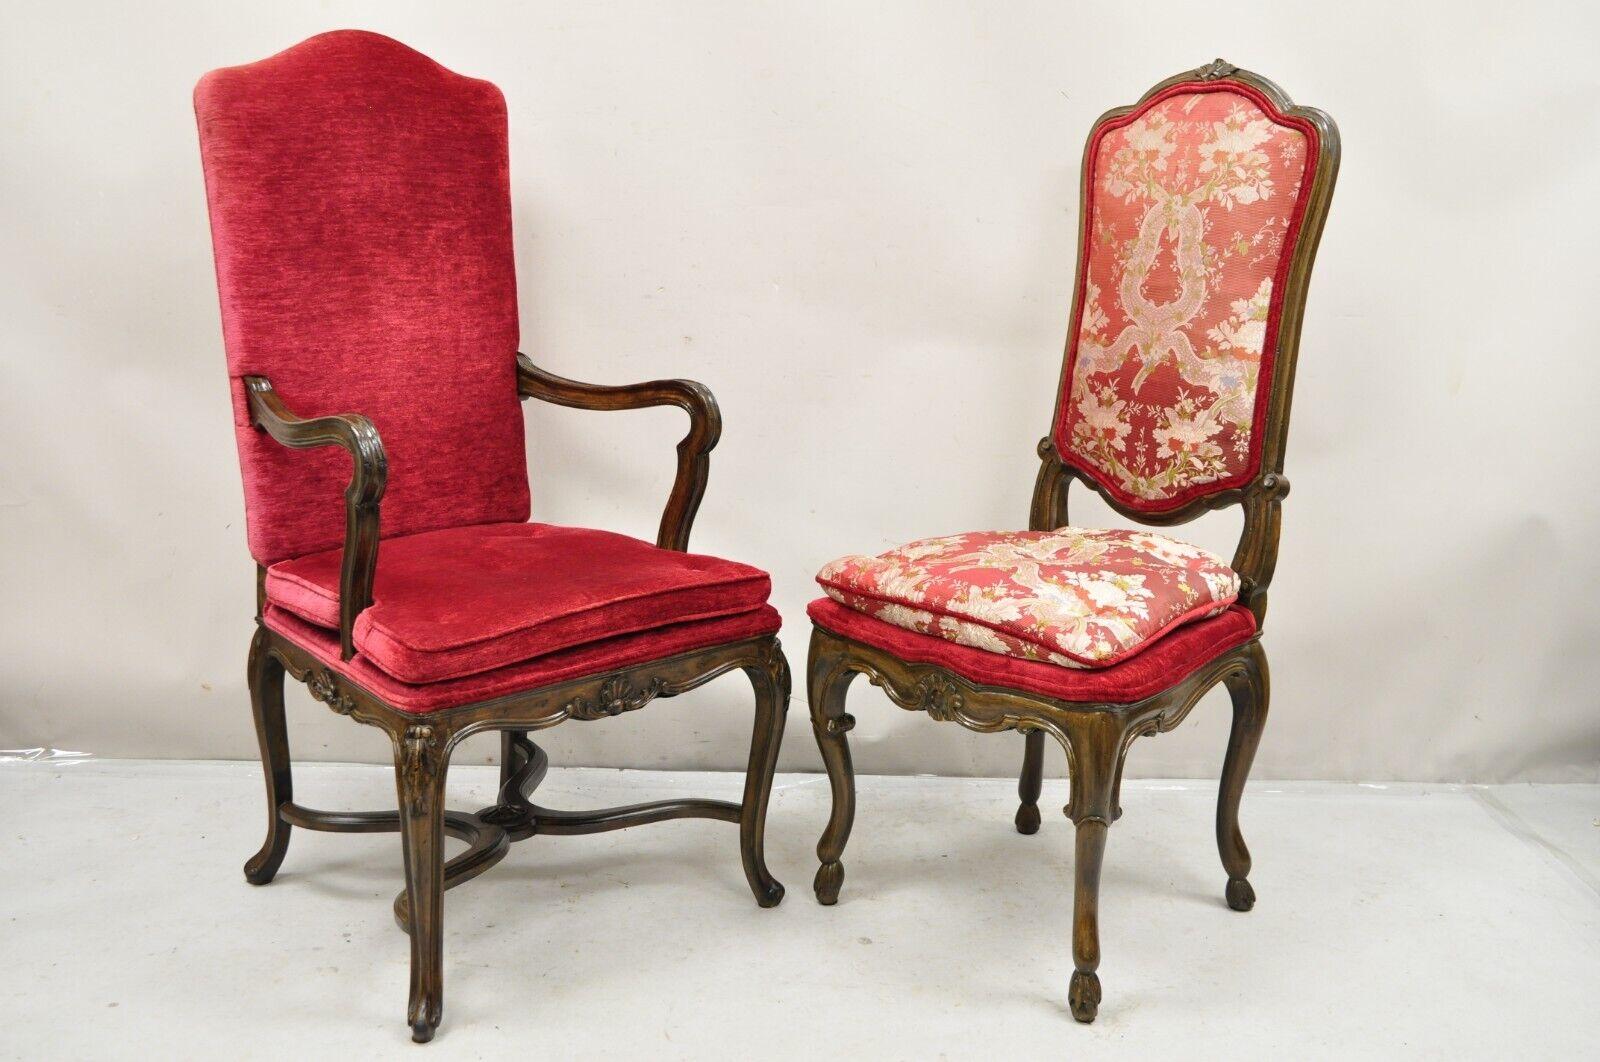 Vintage Italian Country Provincial Carved Walnut Red Dining Chairs - Set of 6. Item features a slight variation to finish color and carving details between armchairs and side chairs, nicely carved solid wood frames, distressed finish, floral silk